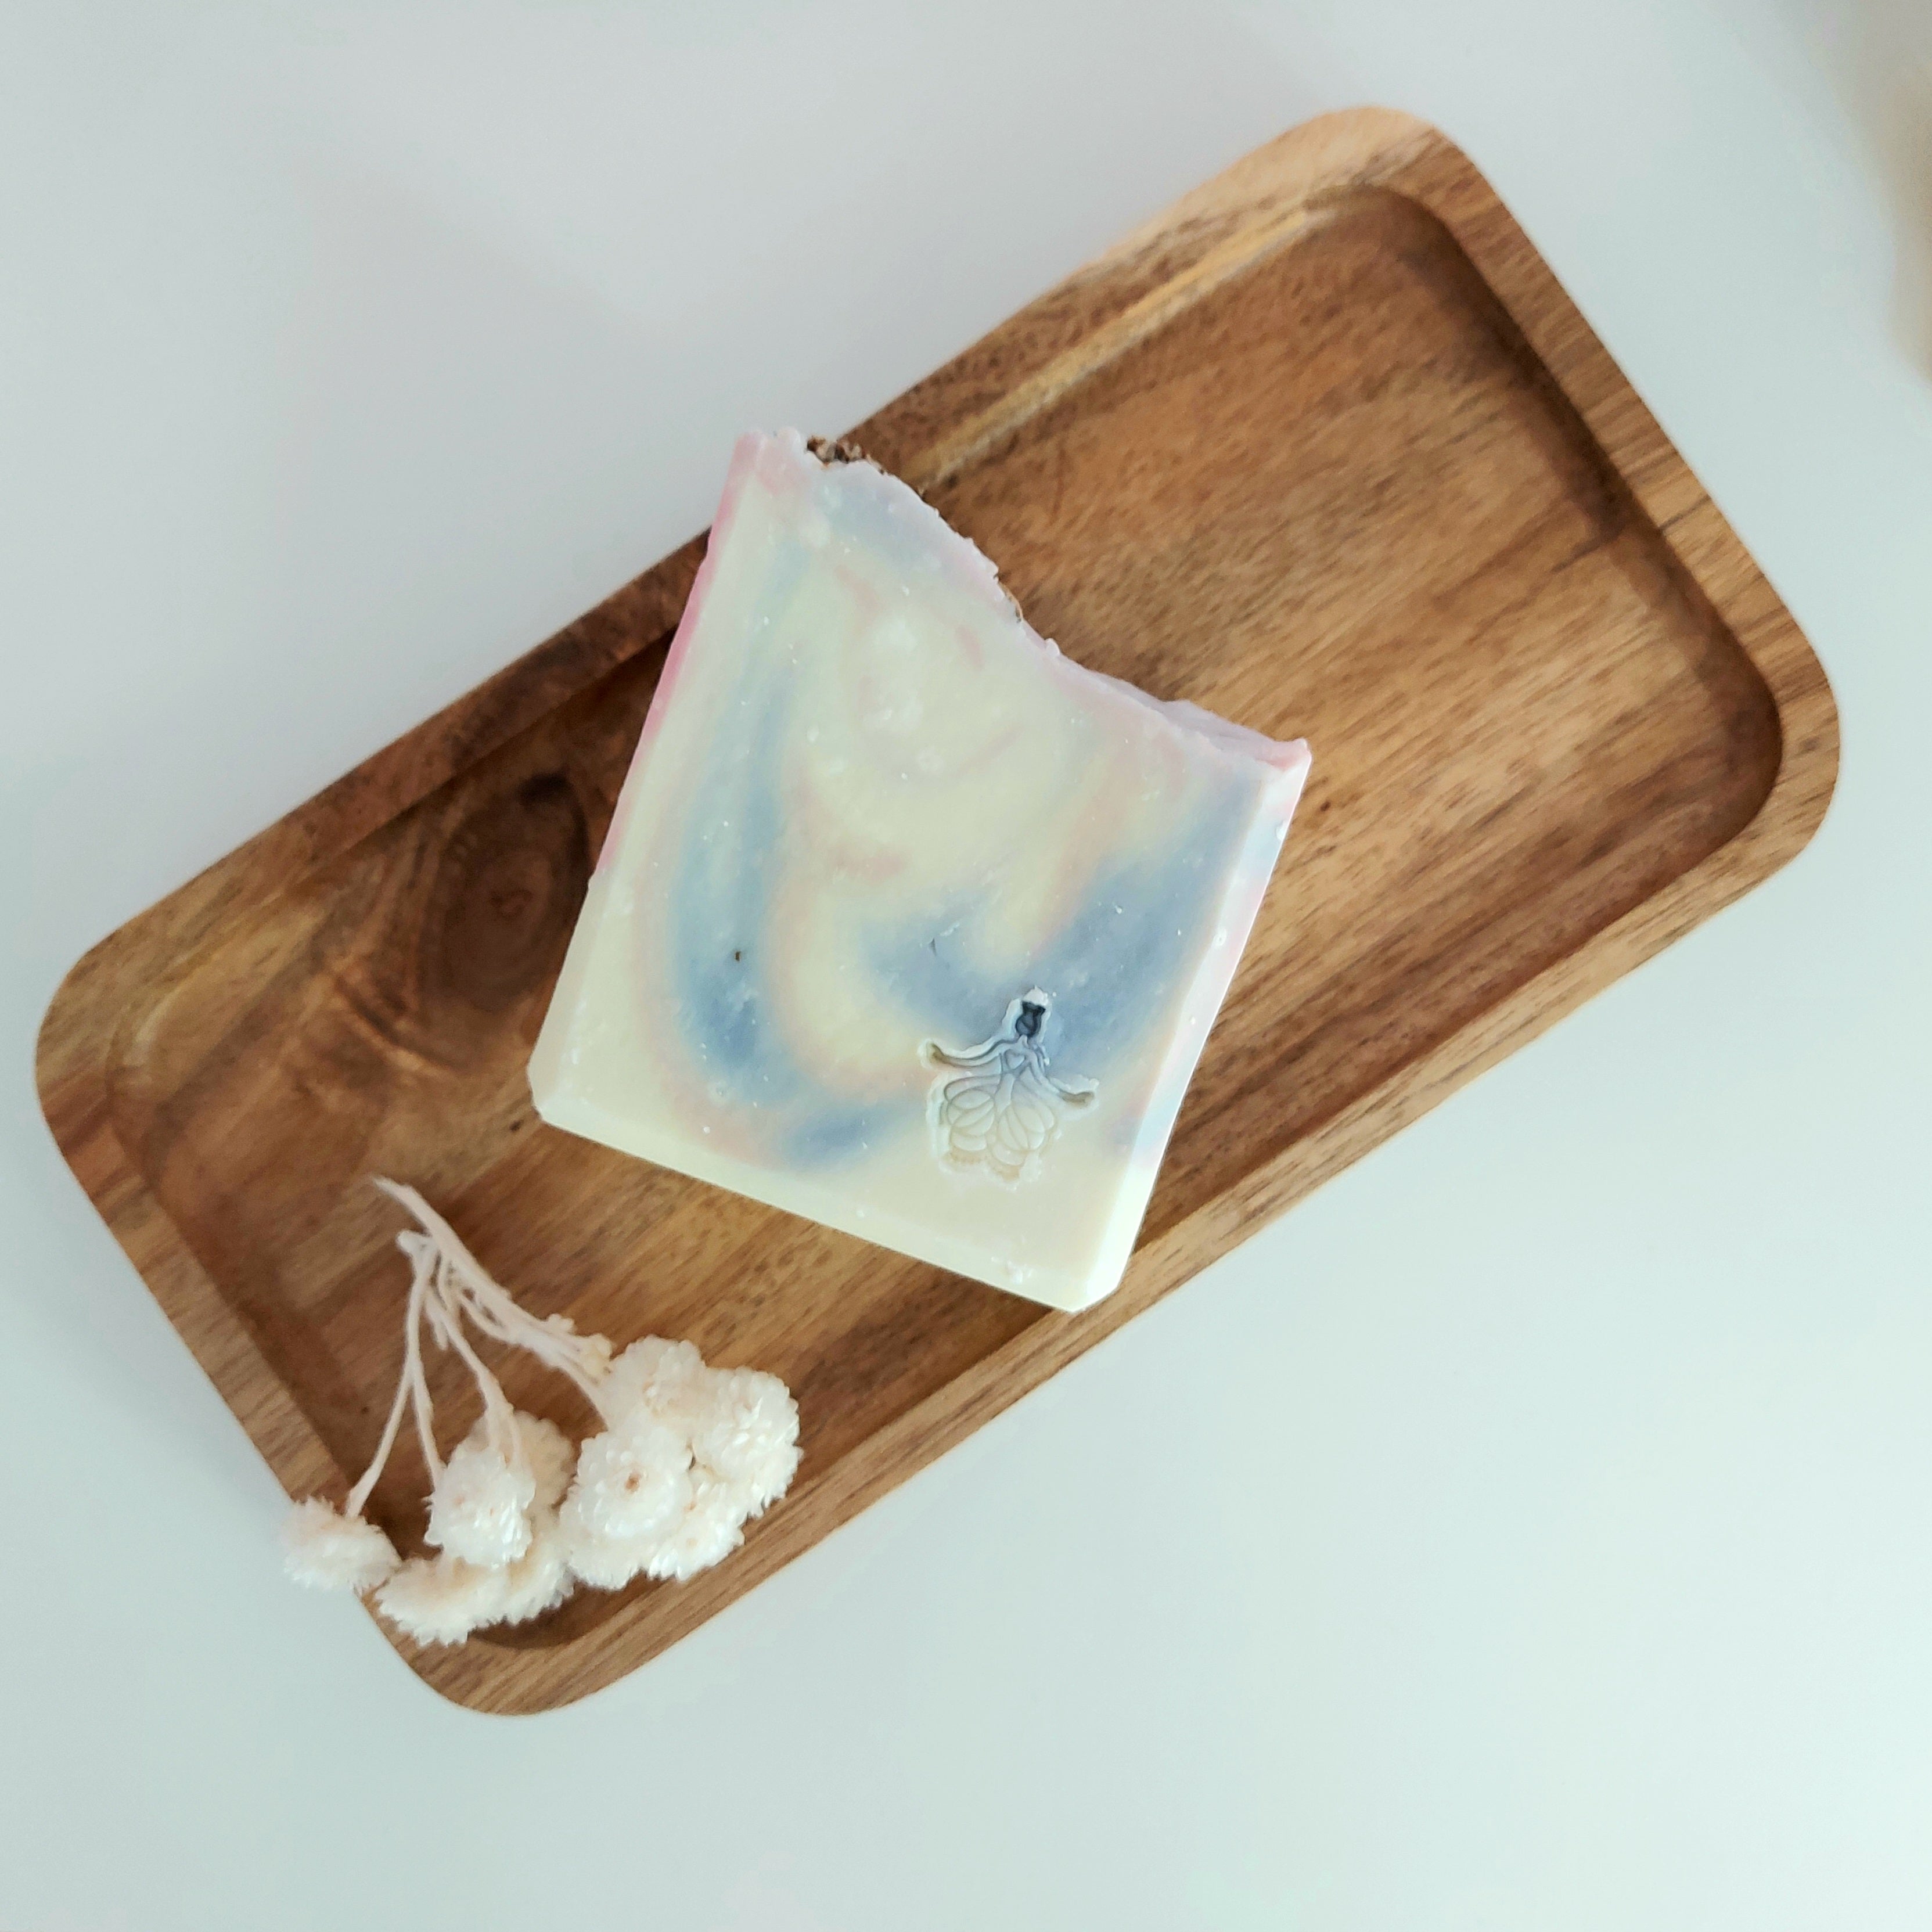 La La Lavender soap, with shea butter and lavender oil by Monarchess Natural Luxuries skincare products, monarchess, Amman, Irbid, Jordan